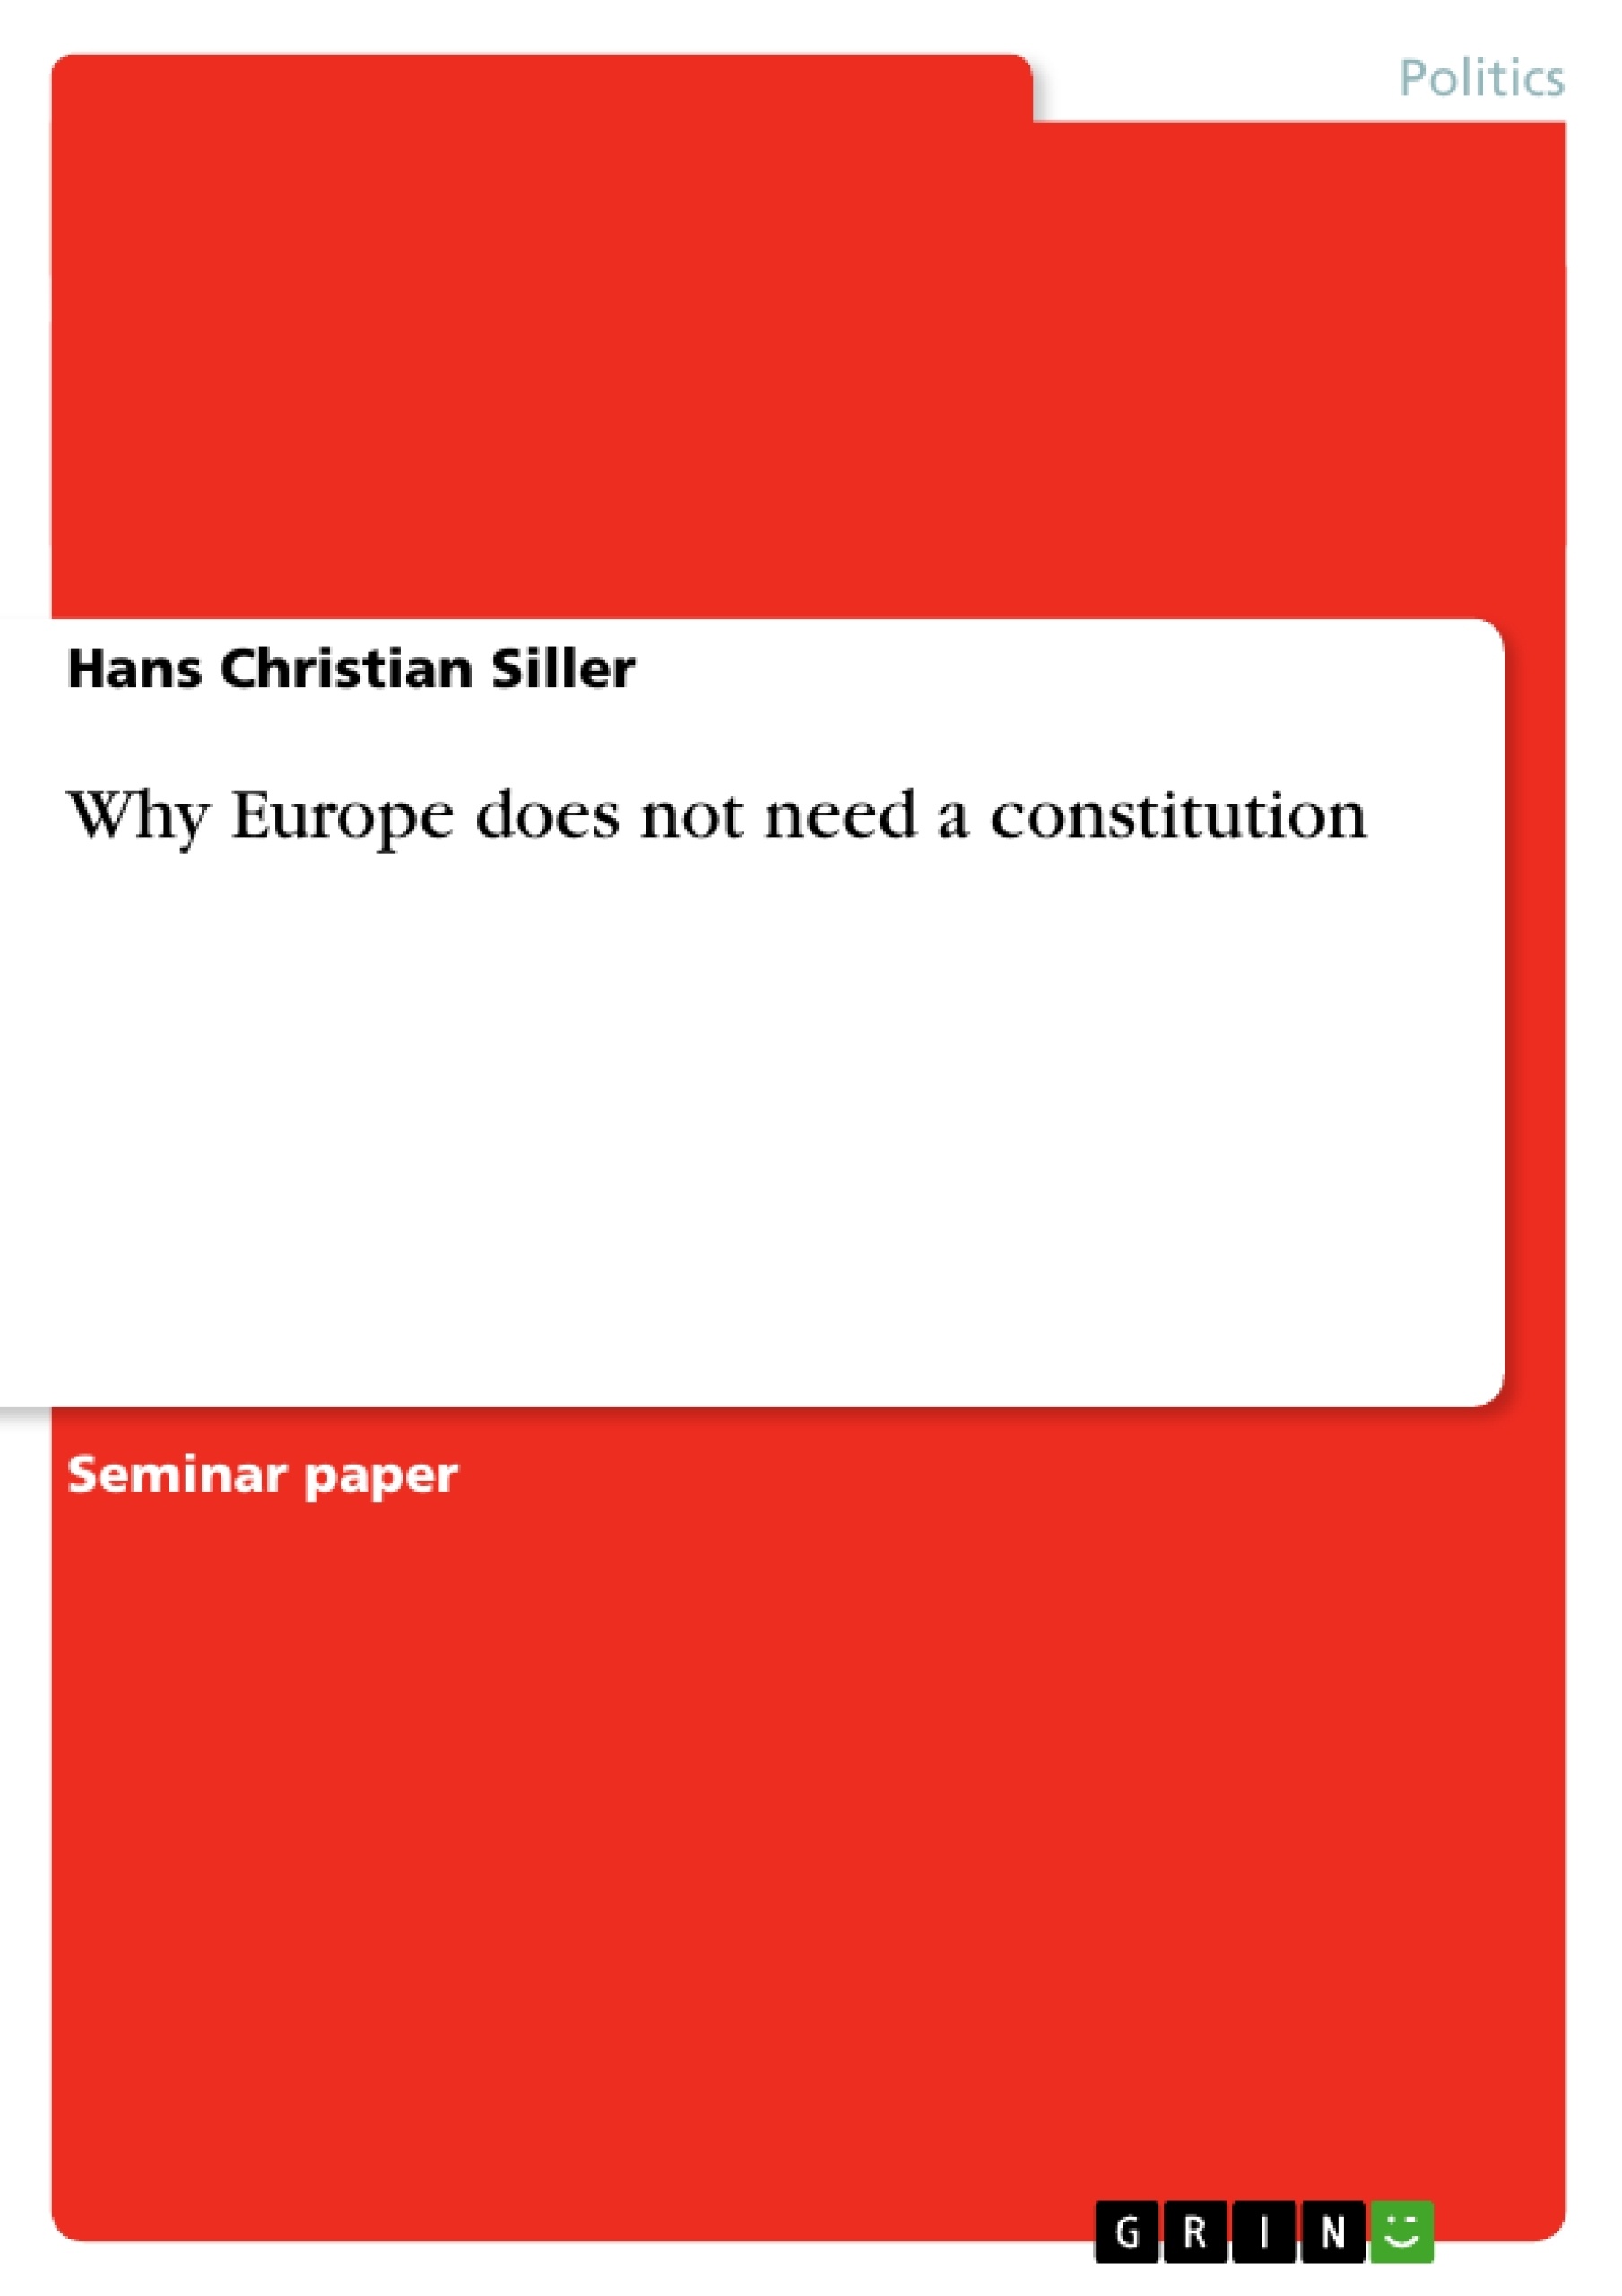 Title: Why Europe does not need a constitution